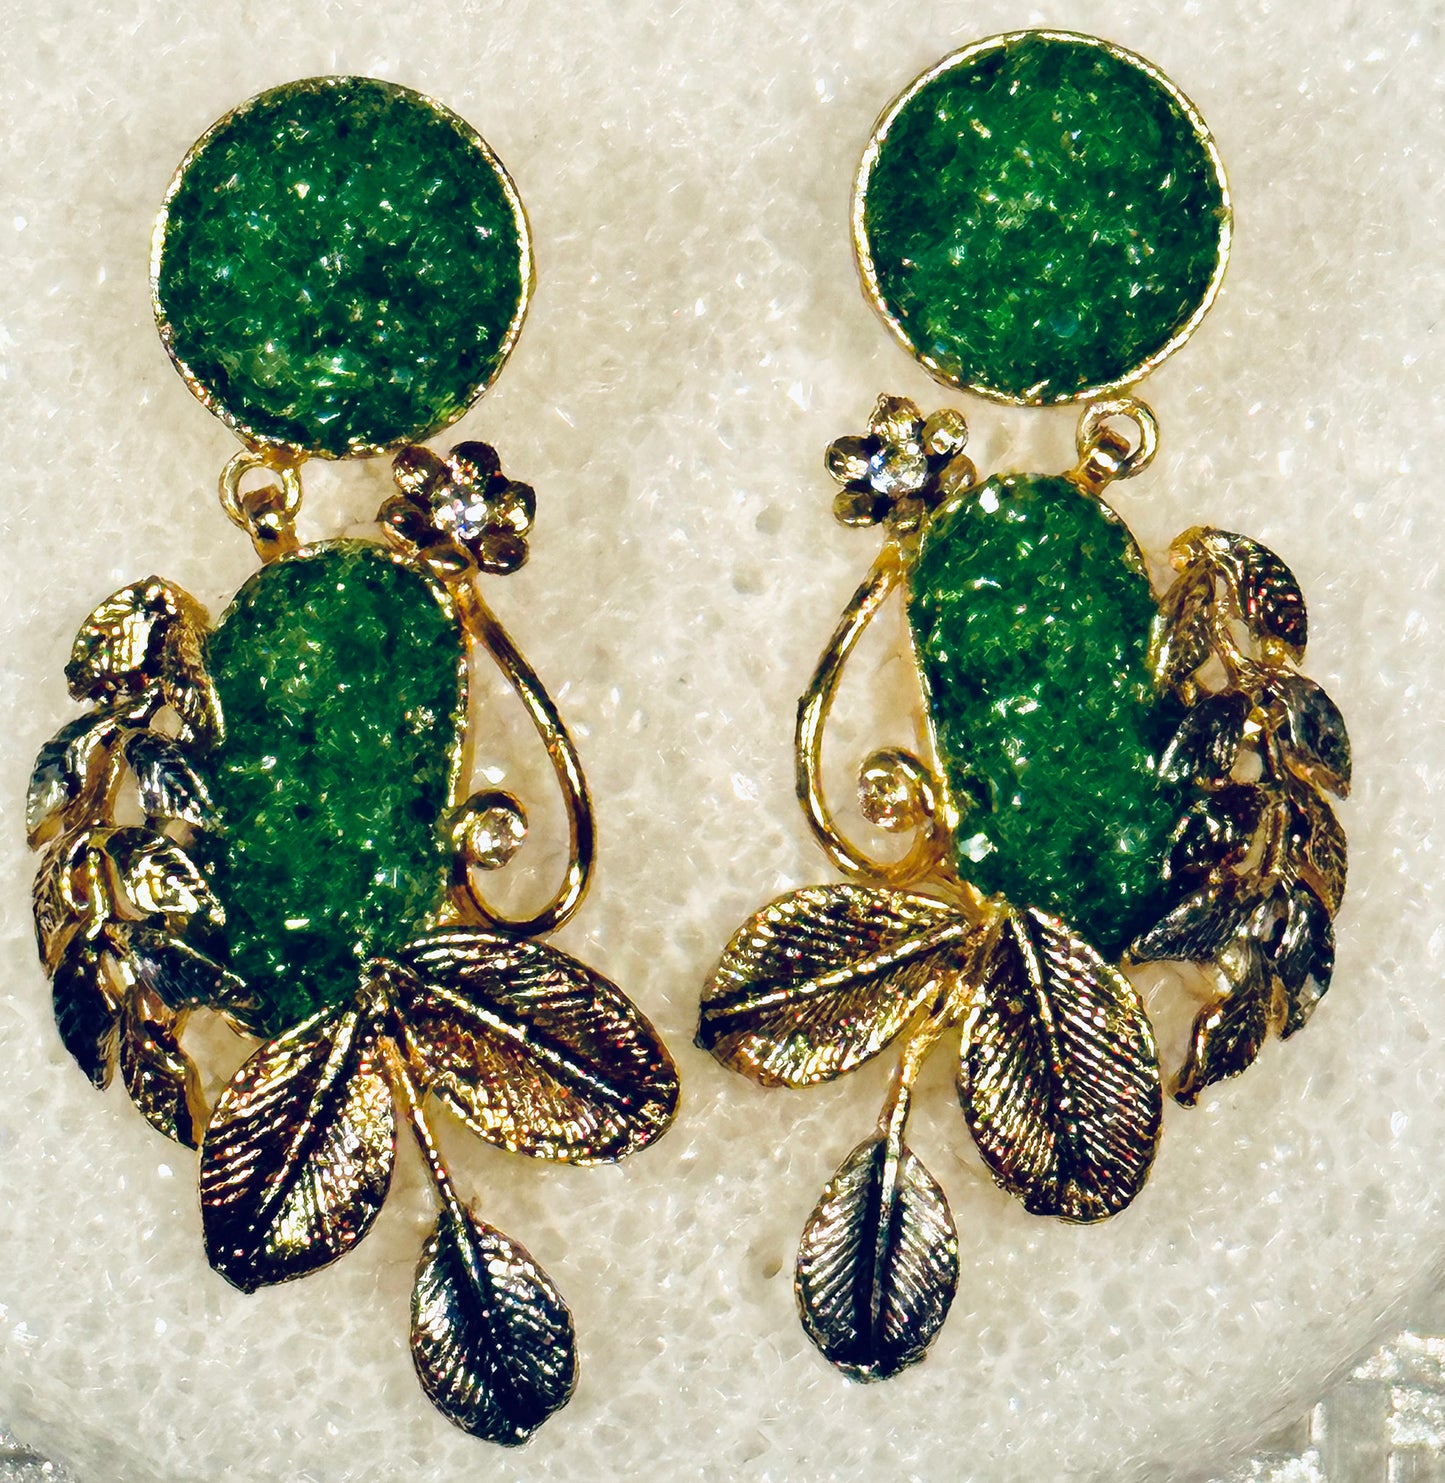 Green Crushed Stone Earring pair